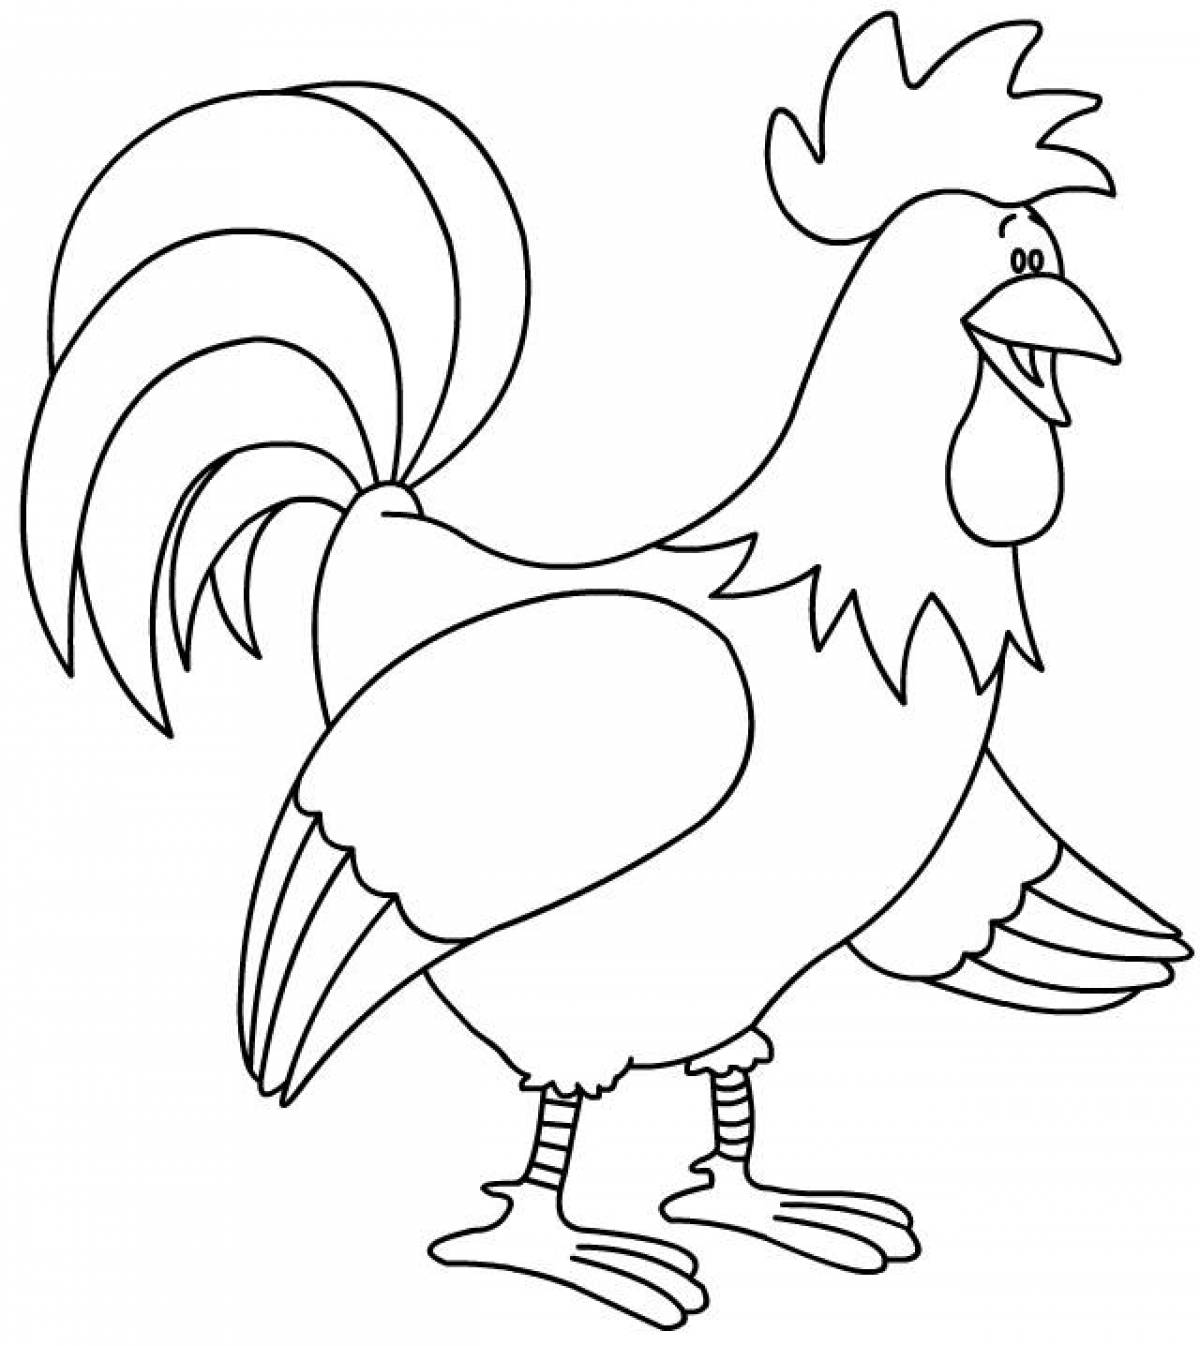 Coloring book funny rooster